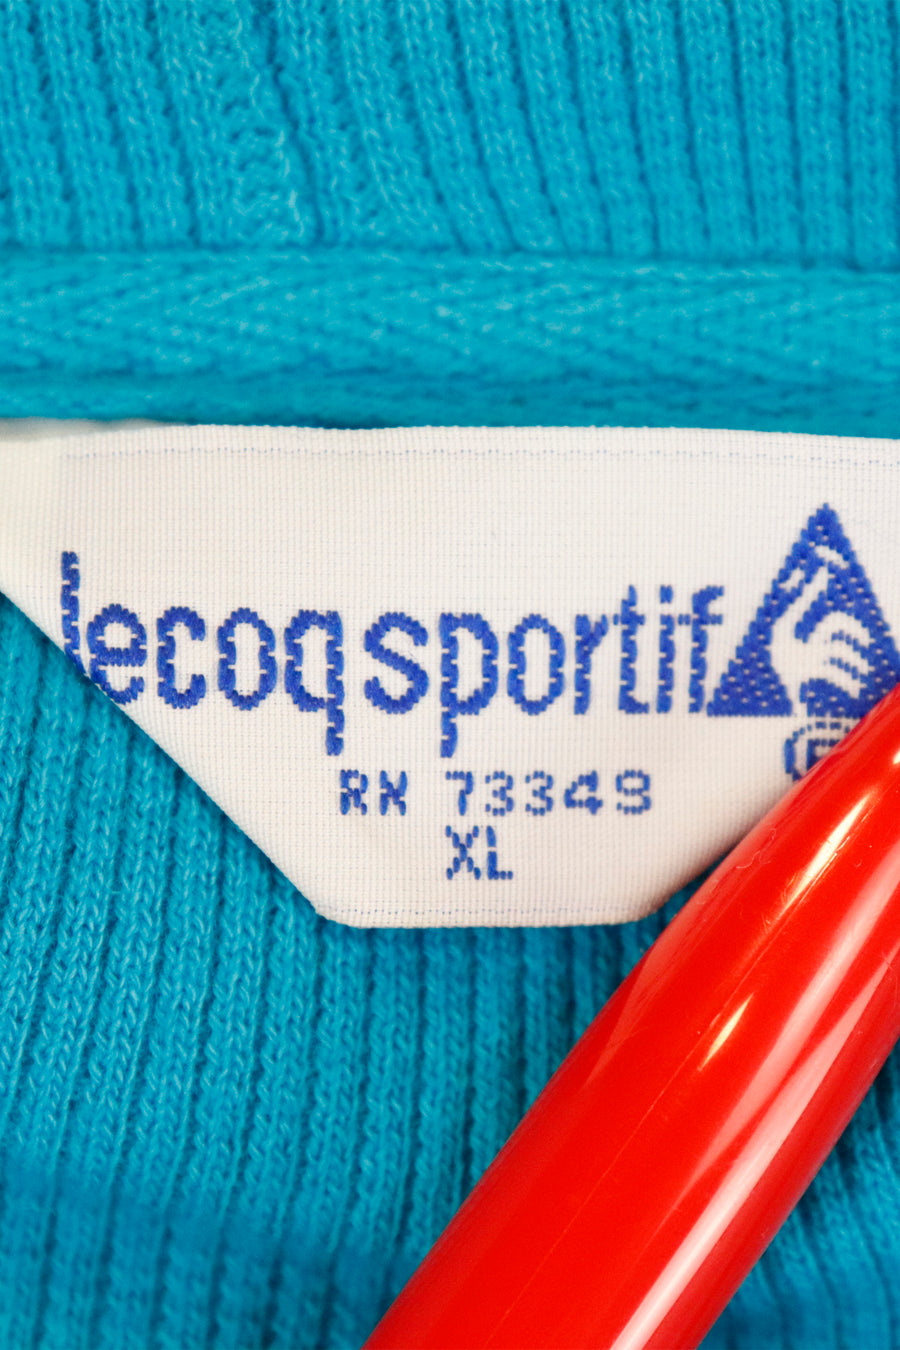 Vintage Le Coqsportif Simple Ebroidered Roster On Front Embroidered Lettering On Back Sweatshirt Sz XL